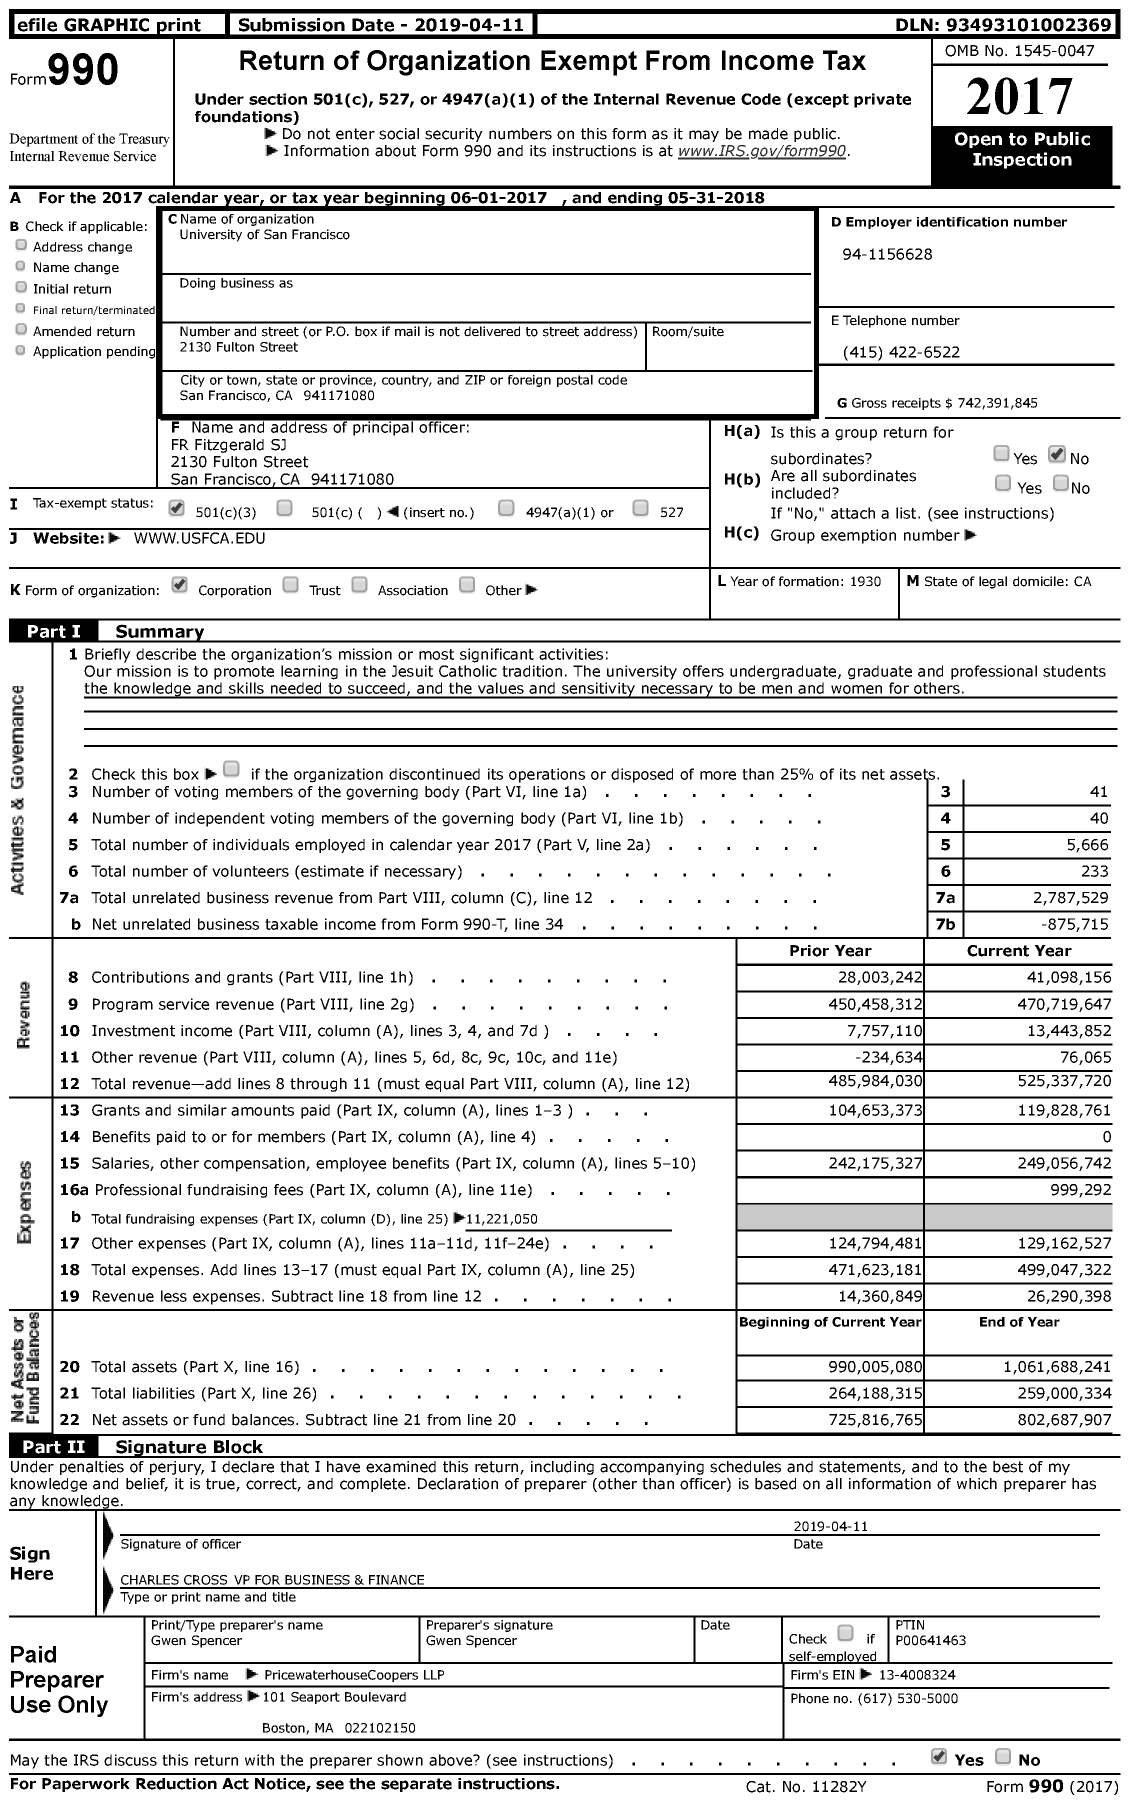 Image of first page of 2017 Form 990 for University of San Francisco (USF)